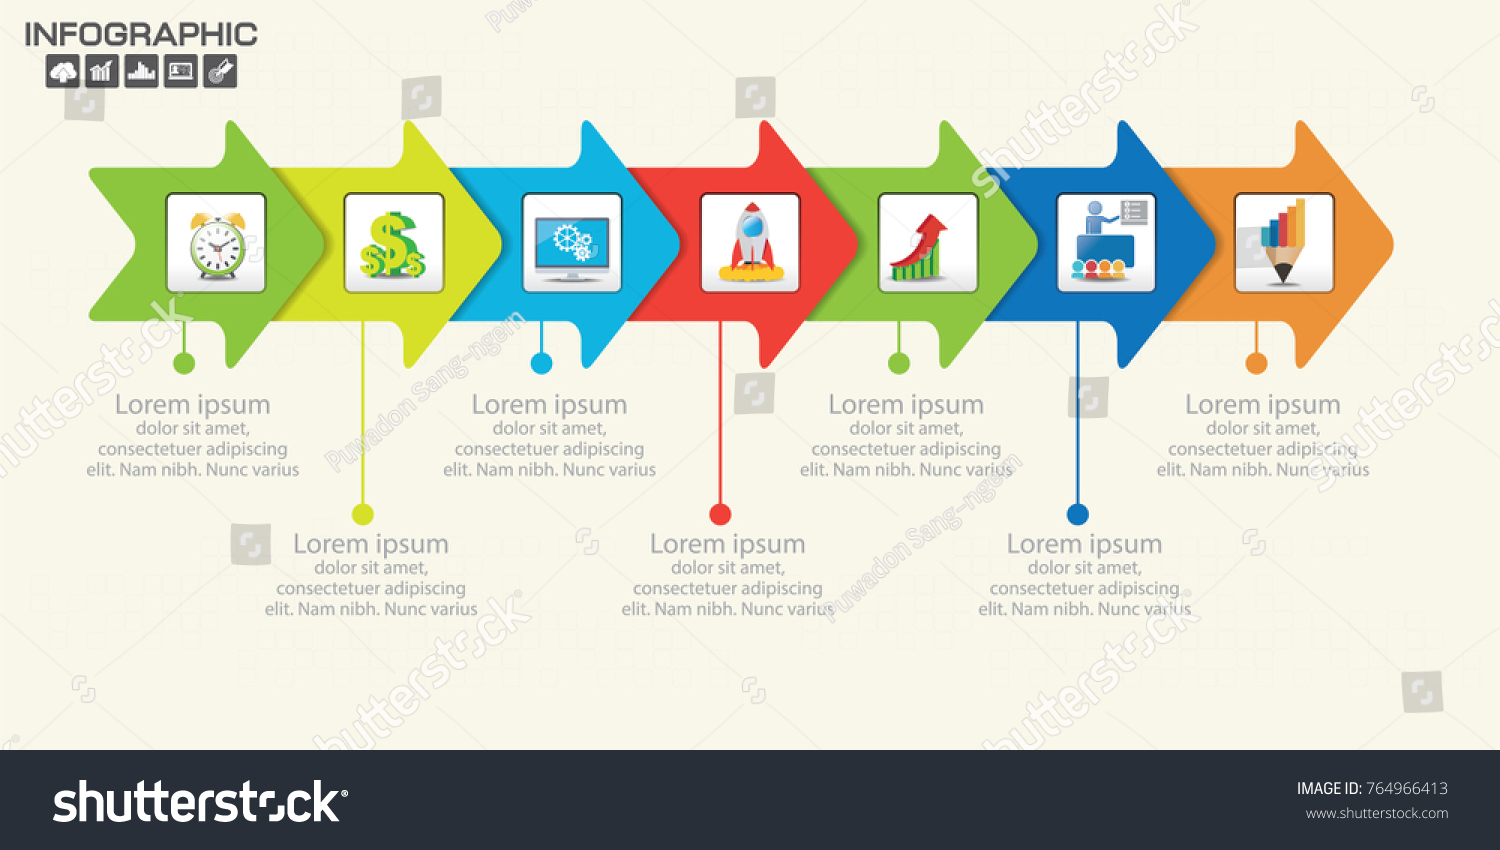 Timeline Infographics Template Arrows Flowchart Workflow Stock Vector Royalty Free 764966413 9305